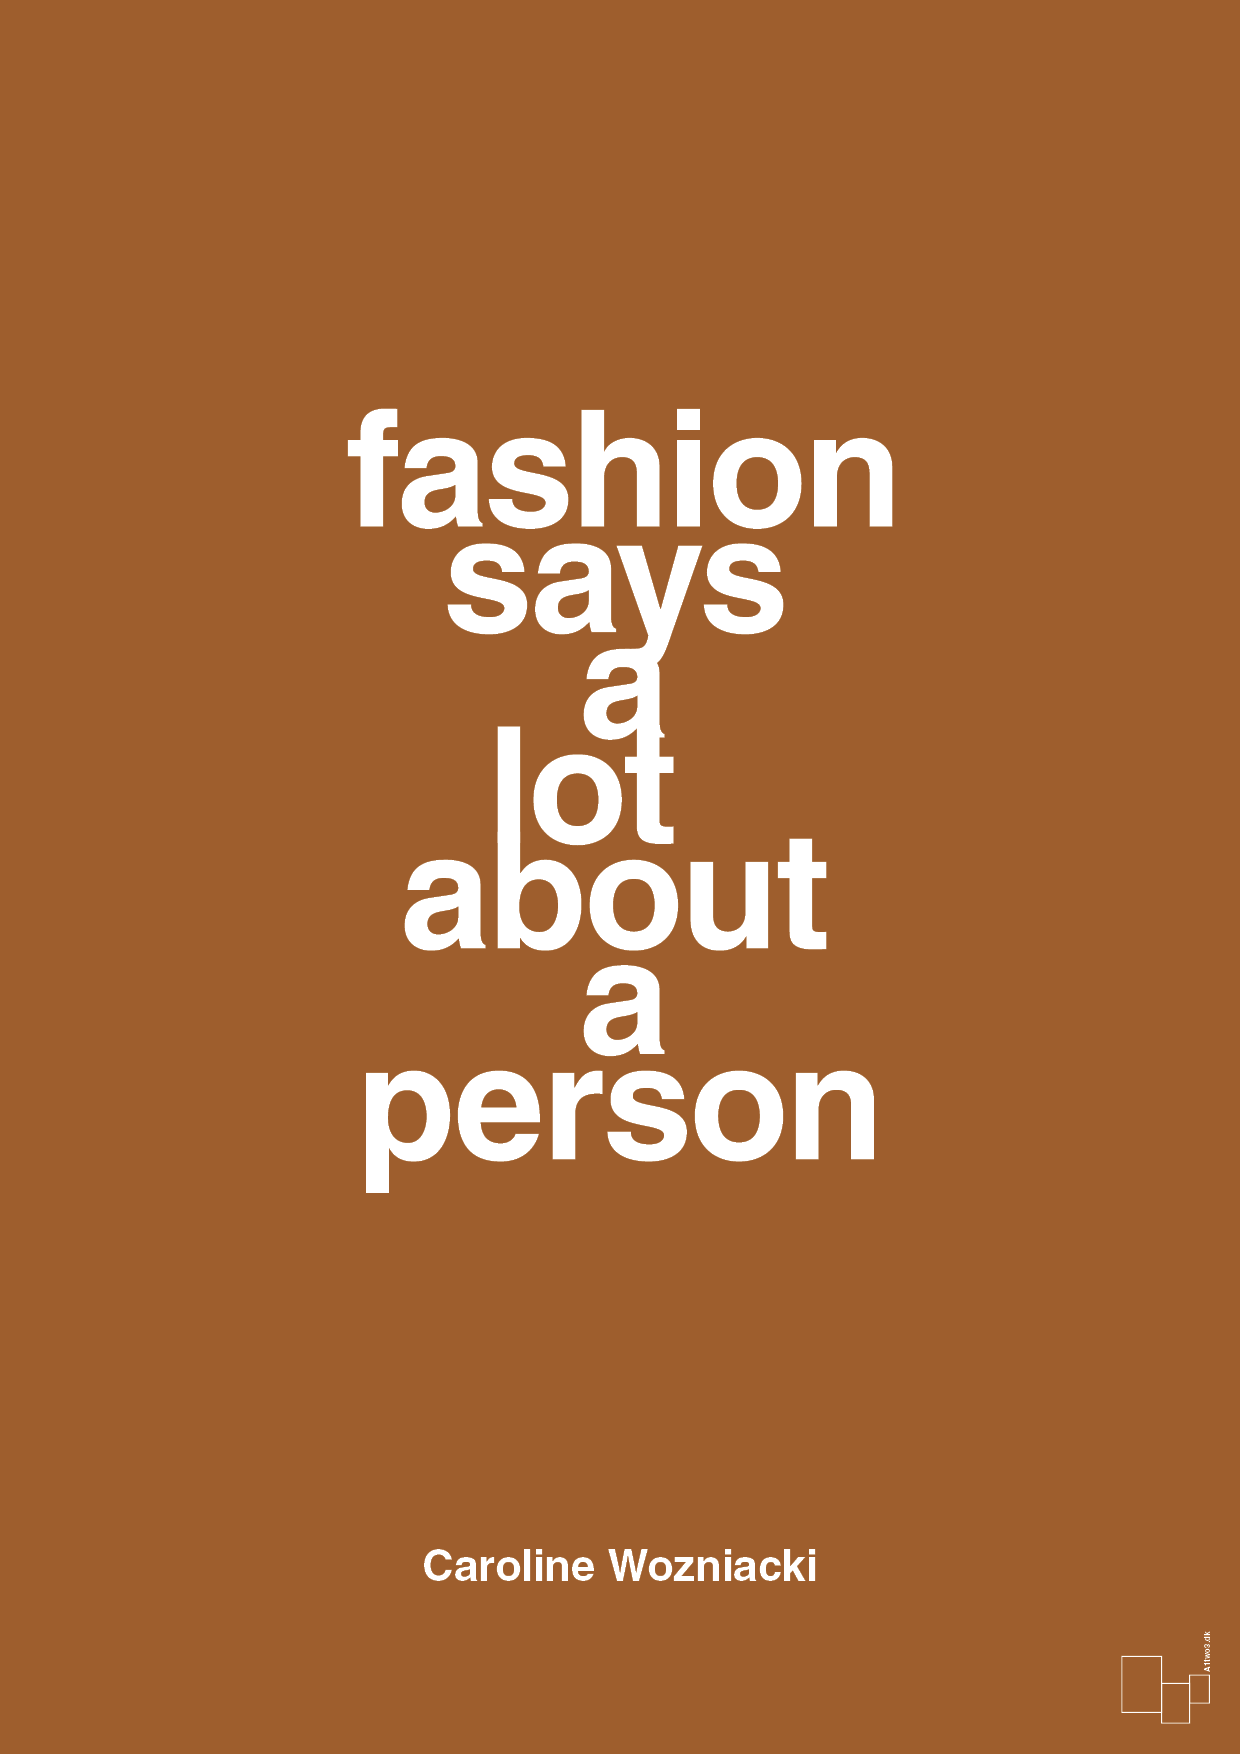 fashion says a lot about a person - Plakat med Citater i Cognac